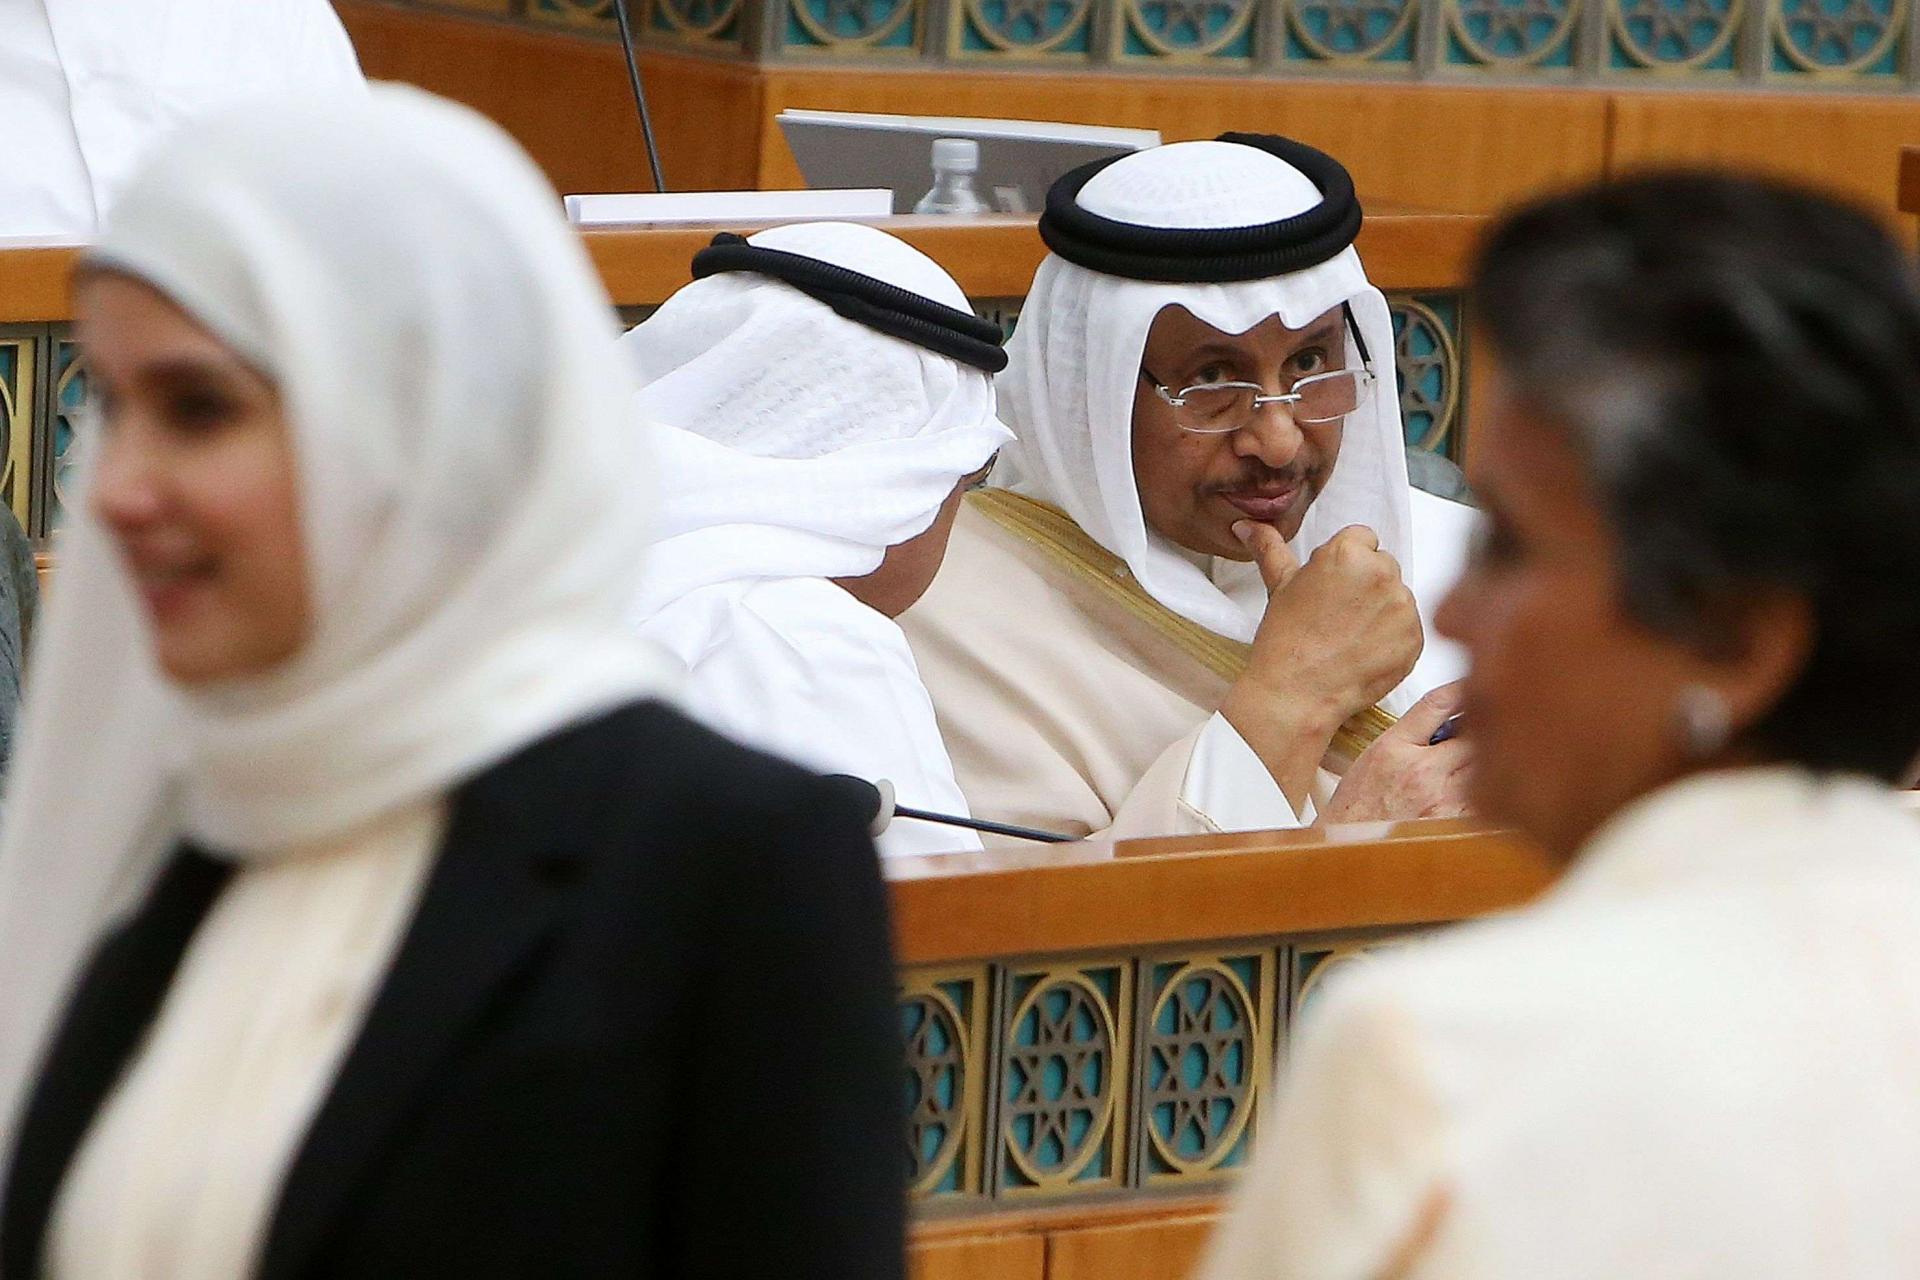 The emir sought to reappoint Sheikh Jaber as premier, a post he has held since 2011, and asked him to form a new cabinet.